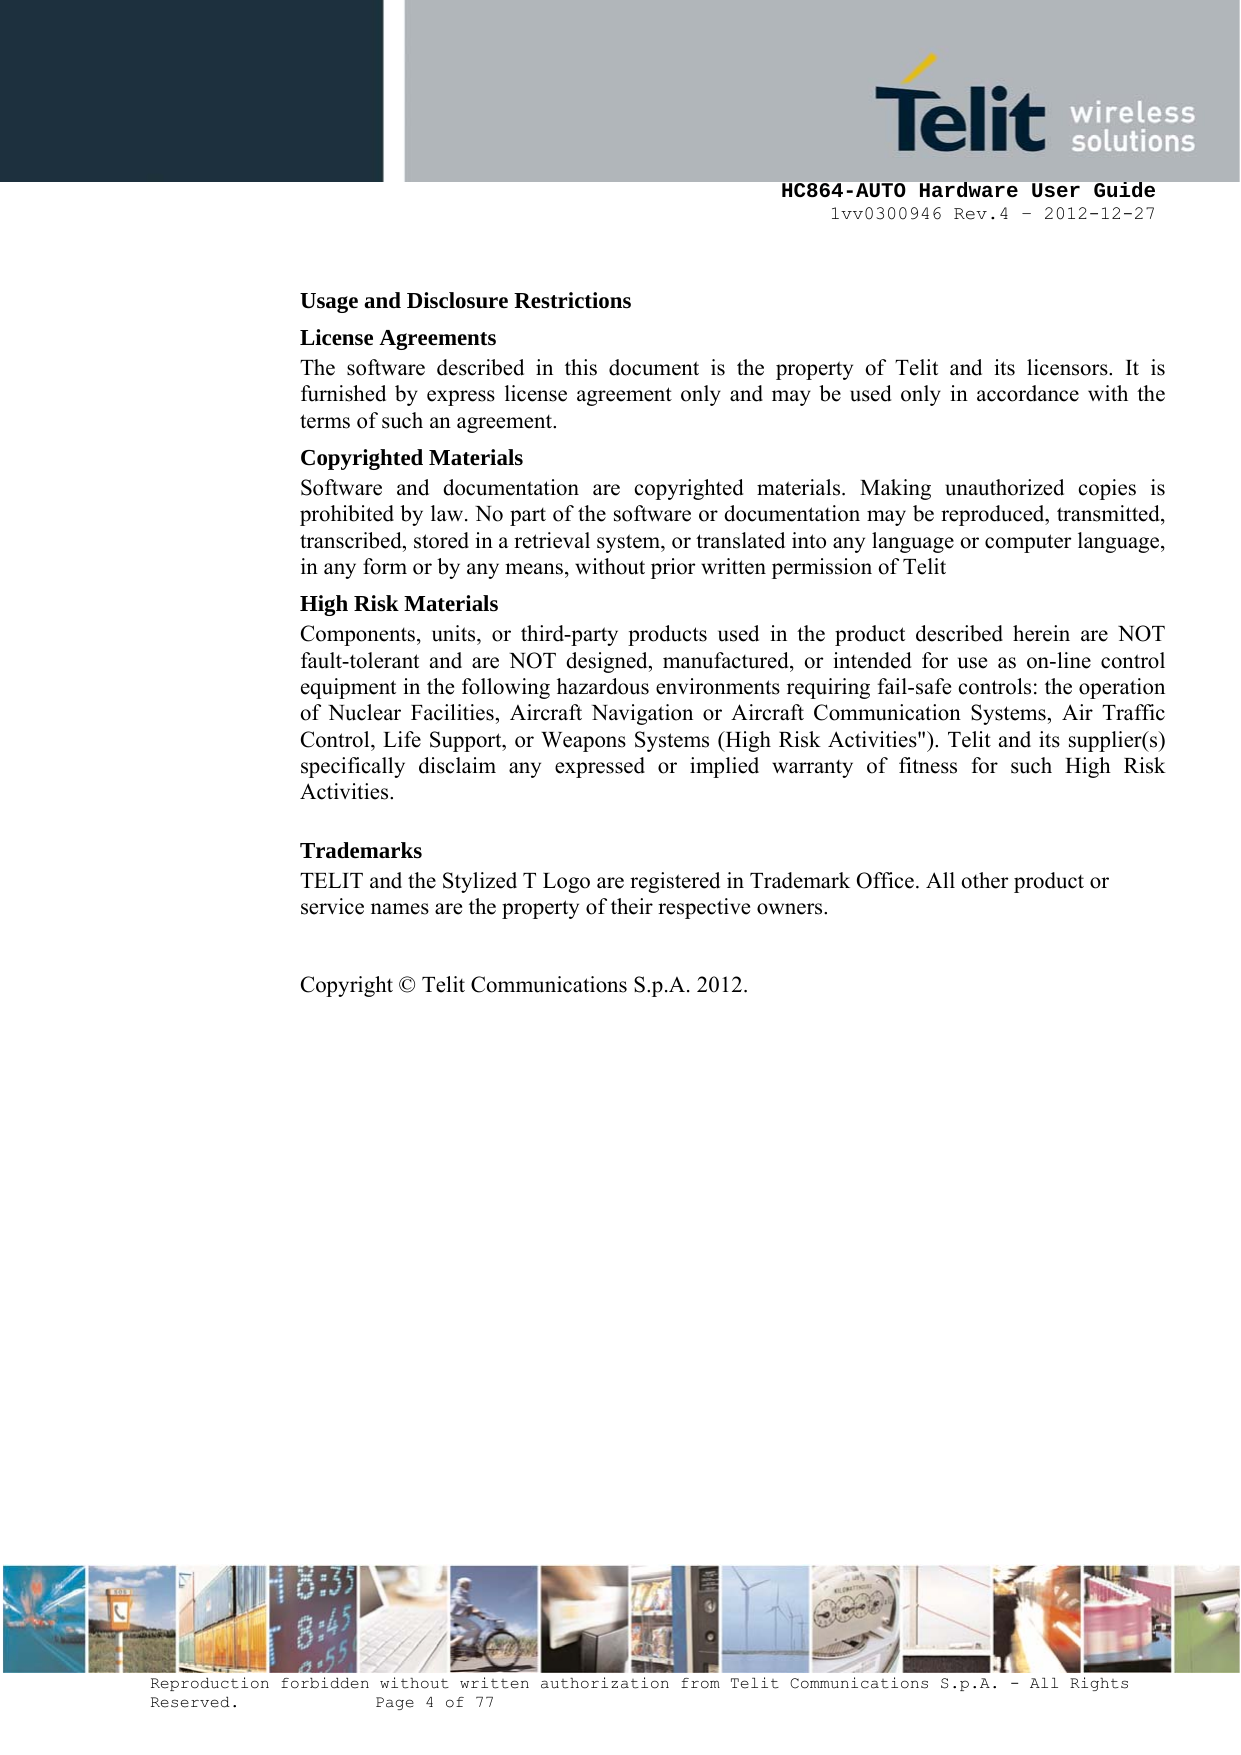     HC864-AUTO Hardware User Guide 1vv0300946 Rev.4 – 2012-12-27 Reproduction forbidden without written authorization from Telit Communications S.p.A. - All Rights Reserved.    Page 4 of 77  Usage and Disclosure Restrictions License Agreements The software described in this document is the property of Telit and its licensors. It is furnished by express license agreement only and may be used only in accordance with the terms of such an agreement. Copyrighted Materials Software and documentation are copyrighted materials. Making unauthorized copies is prohibited by law. No part of the software or documentation may be reproduced, transmitted, transcribed, stored in a retrieval system, or translated into any language or computer language, in any form or by any means, without prior written permission of Telit High Risk Materials Components, units, or third-party products used in the product described herein are NOT fault-tolerant and are NOT designed, manufactured, or intended for use as on-line control equipment in the following hazardous environments requiring fail-safe controls: the operation of Nuclear Facilities, Aircraft Navigation or Aircraft Communication Systems, Air Traffic Control, Life Support, or Weapons Systems (High Risk Activities&quot;). Telit and its supplier(s) specifically disclaim any expressed or implied warranty of fitness for such High Risk Activities. Trademarks TELIT and the Stylized T Logo are registered in Trademark Office. All other product or service names are the property of their respective owners.   Copyright © Telit Communications S.p.A. 2012.   